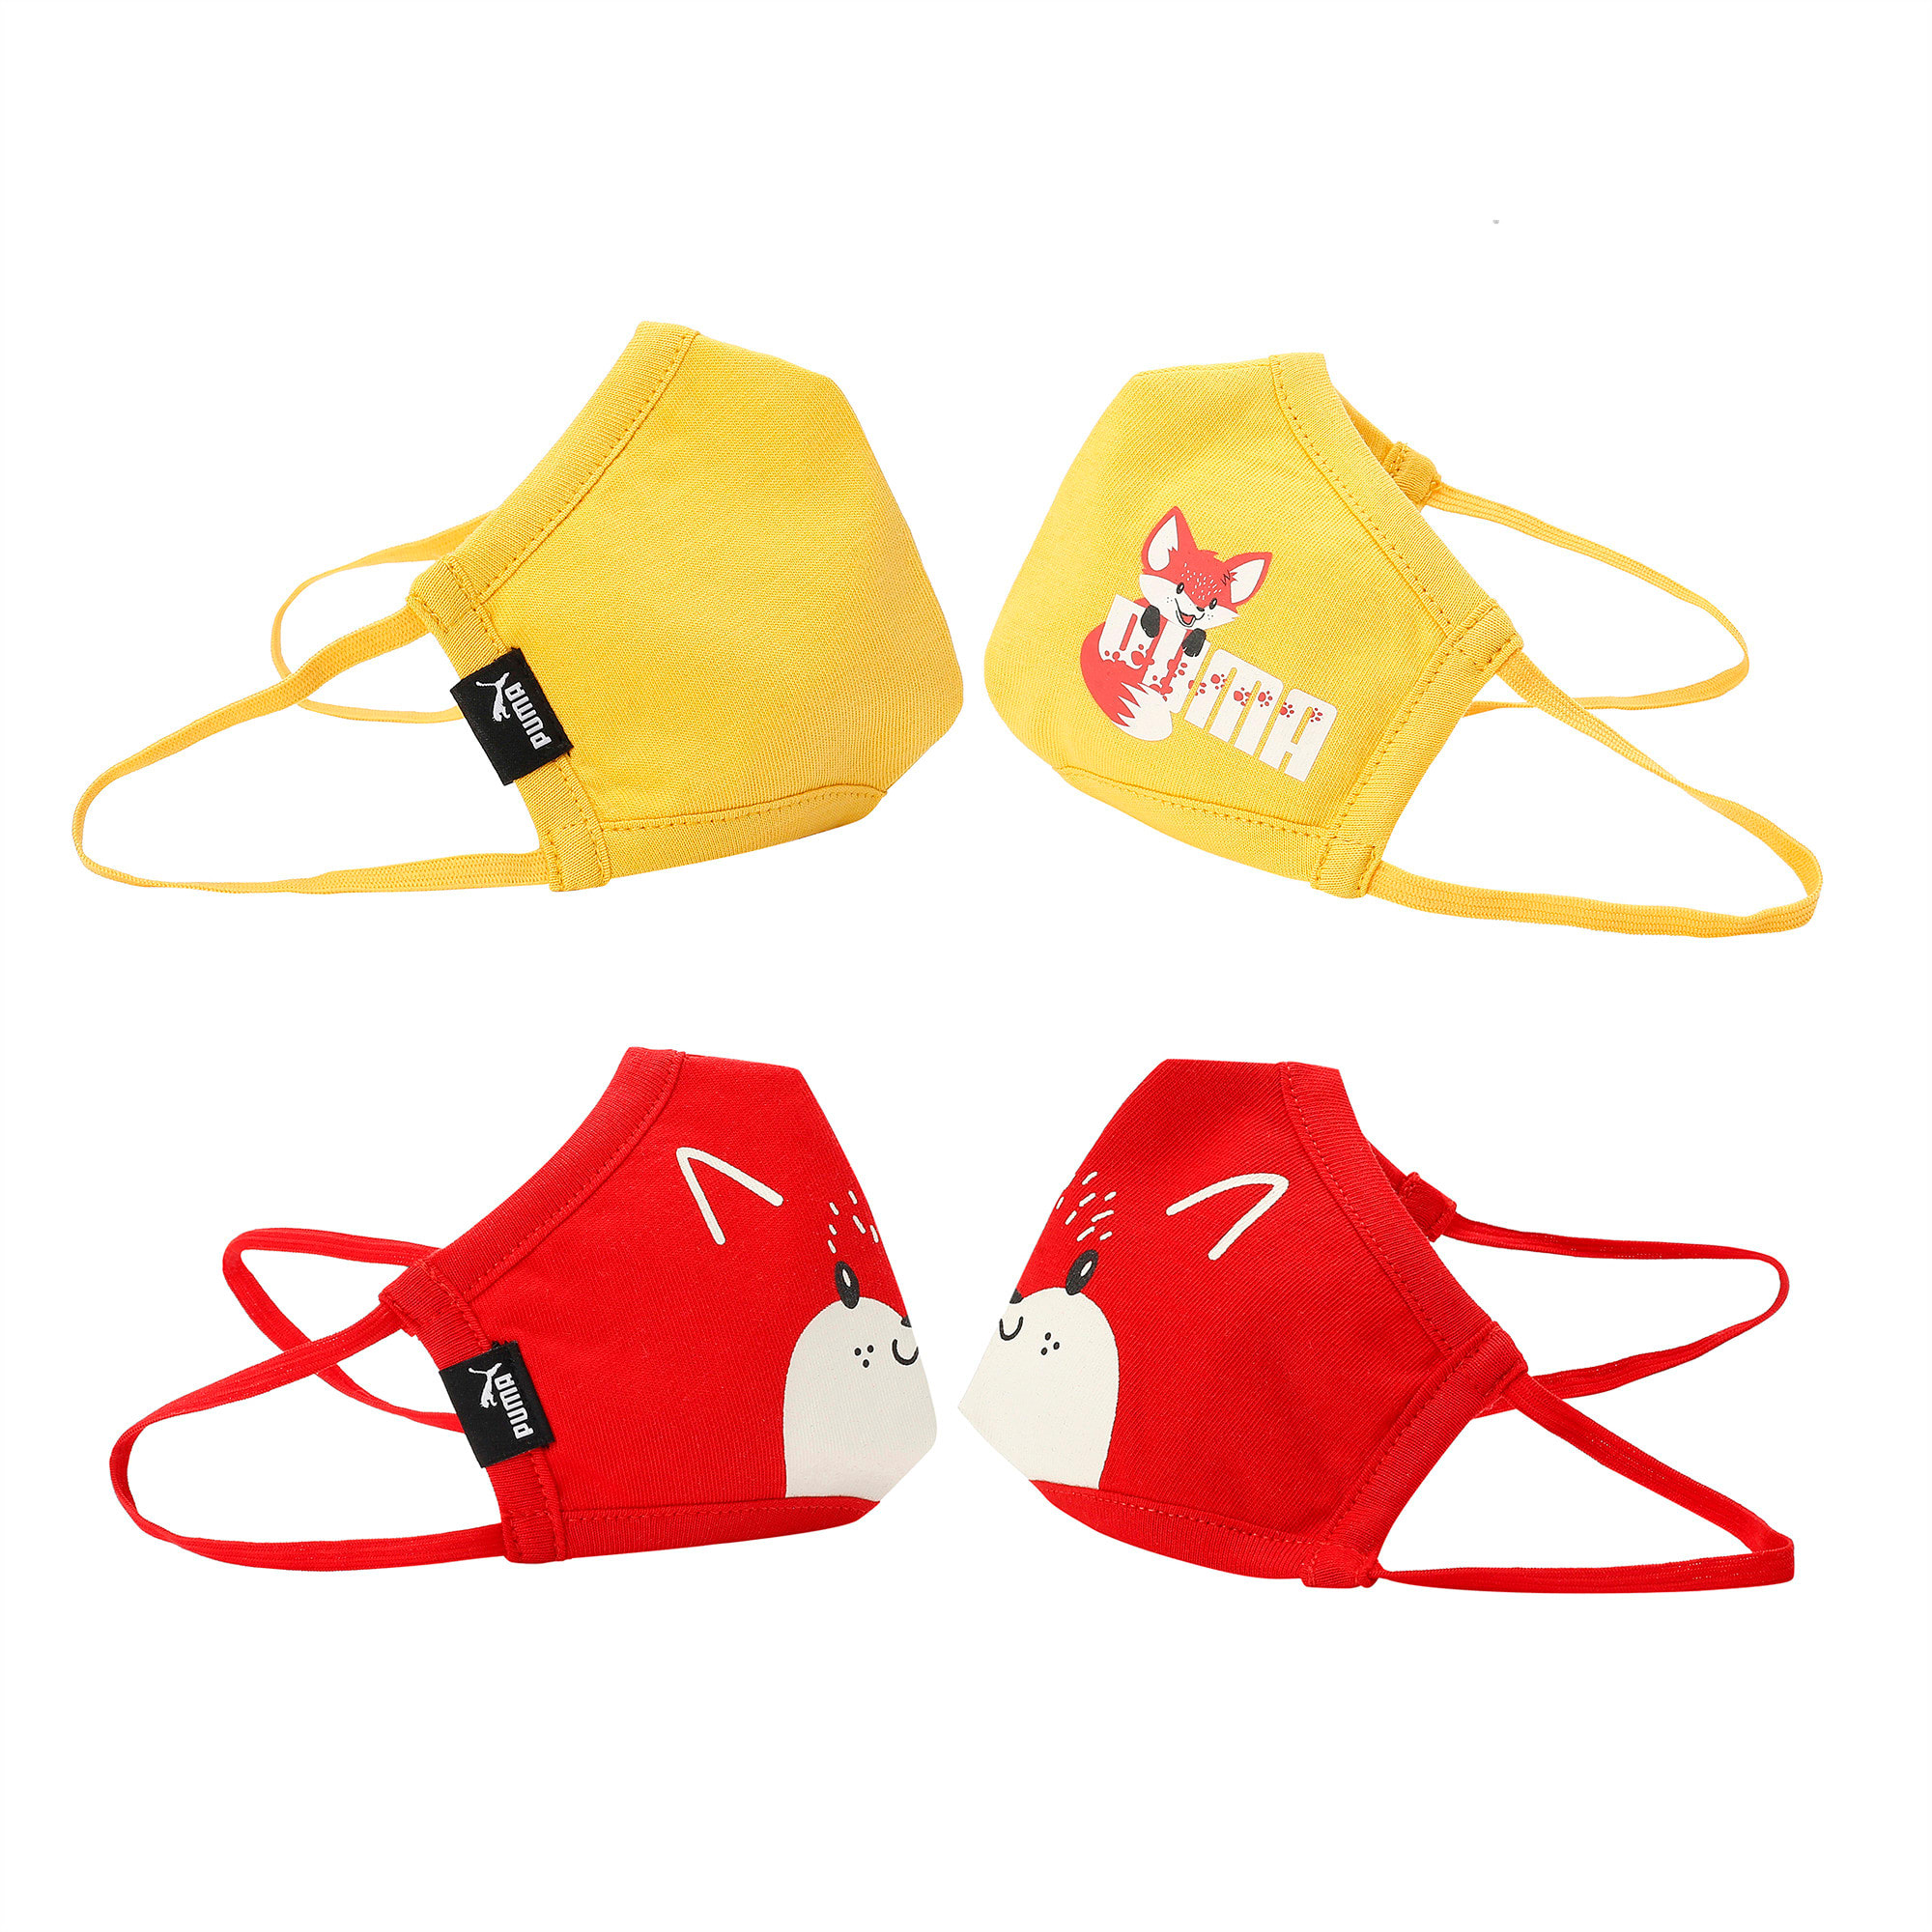 Puma Kids Face Masks Set Of Two Spectra Yellow High Risk Red Puma Shoes Puma